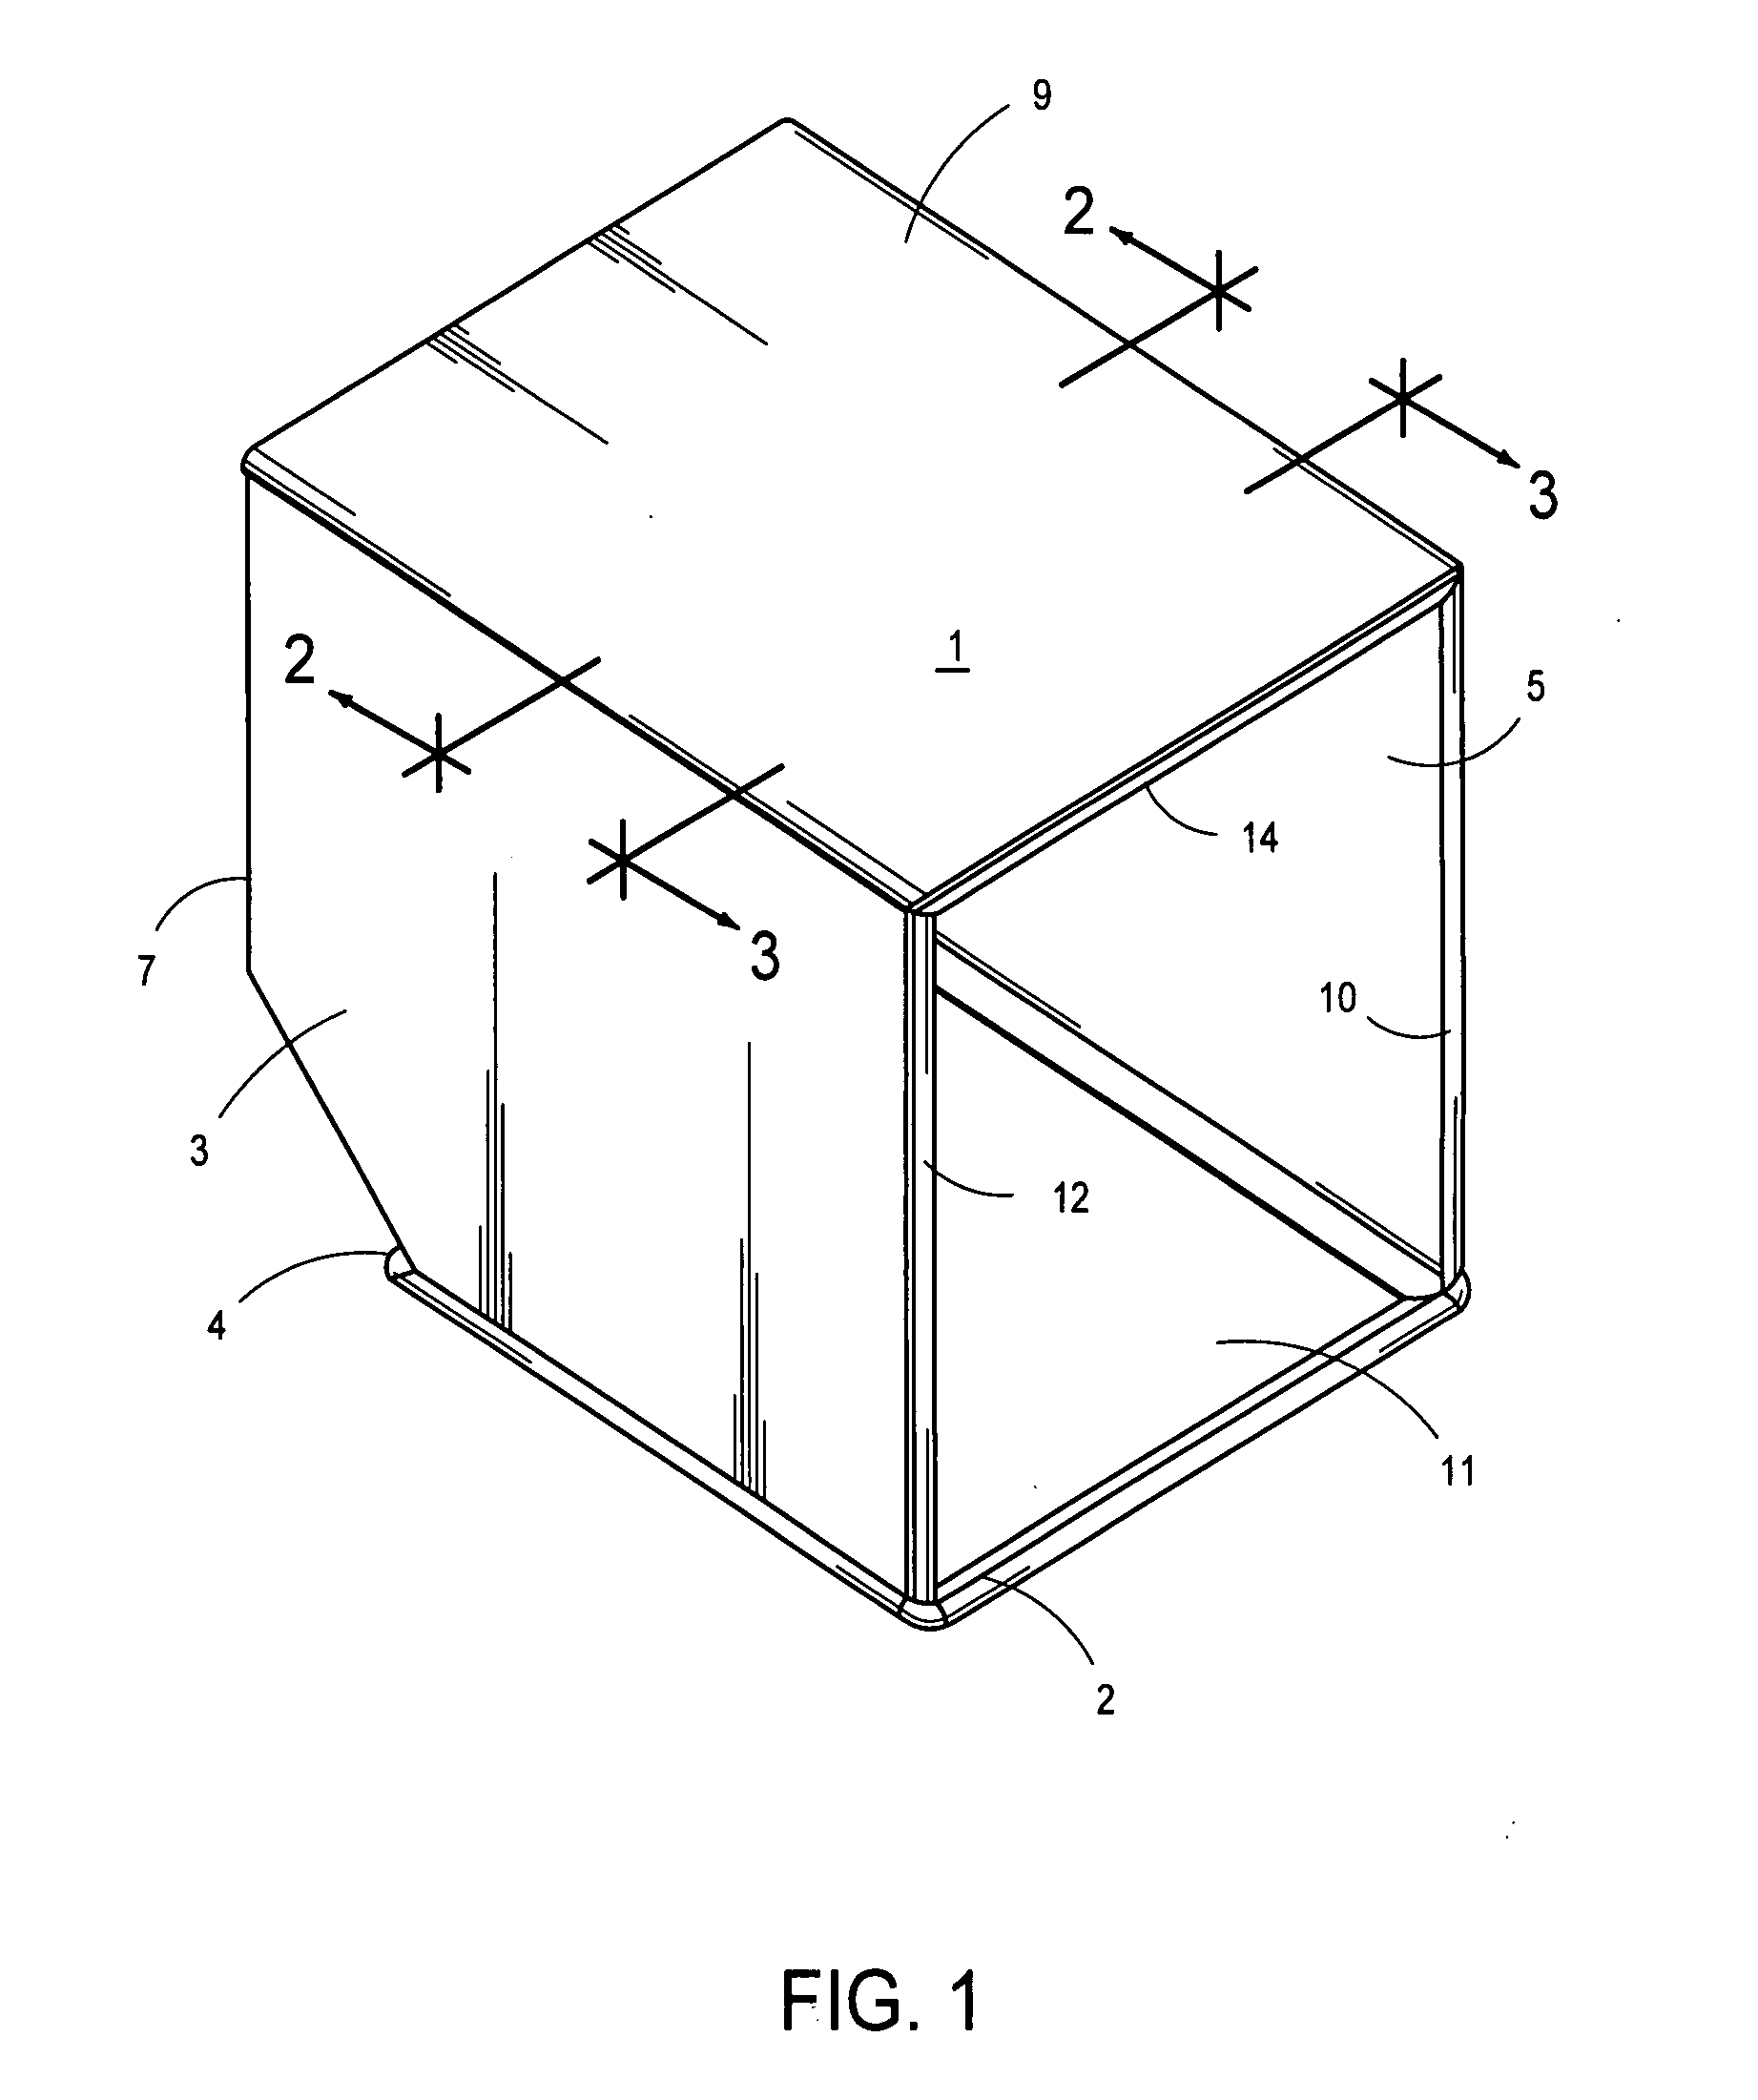 Method of thermoforming fiber reinforced thermoplastic sandwich panels, thermoformed articles, and modular container structure assembled therefrom